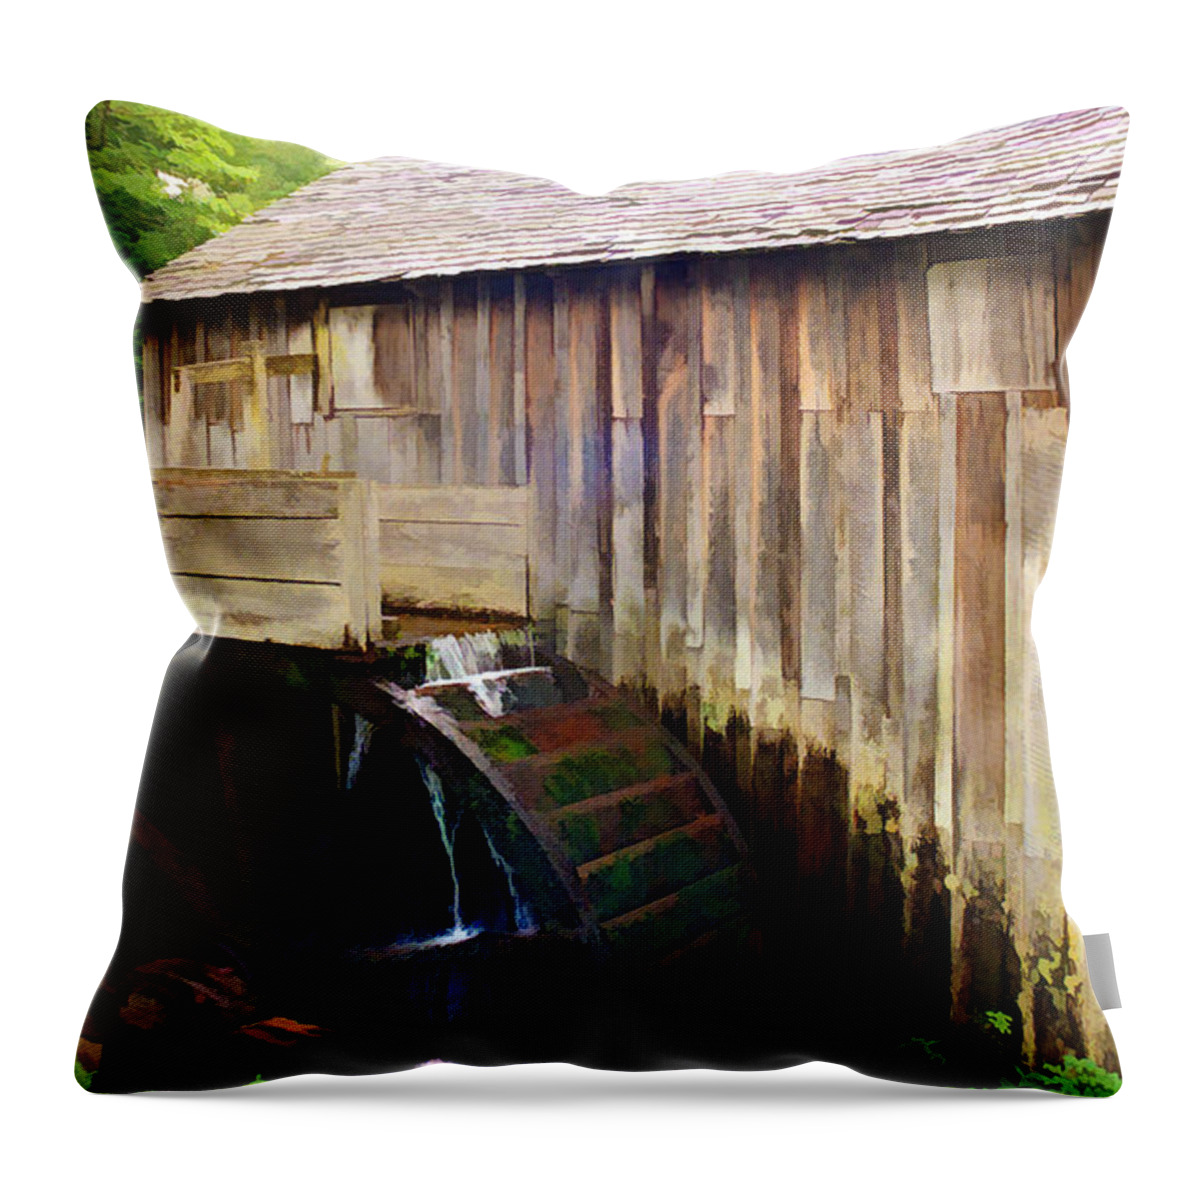 Landscape Throw Pillow featuring the photograph Cade Cove Mill by Sam Davis Johnson